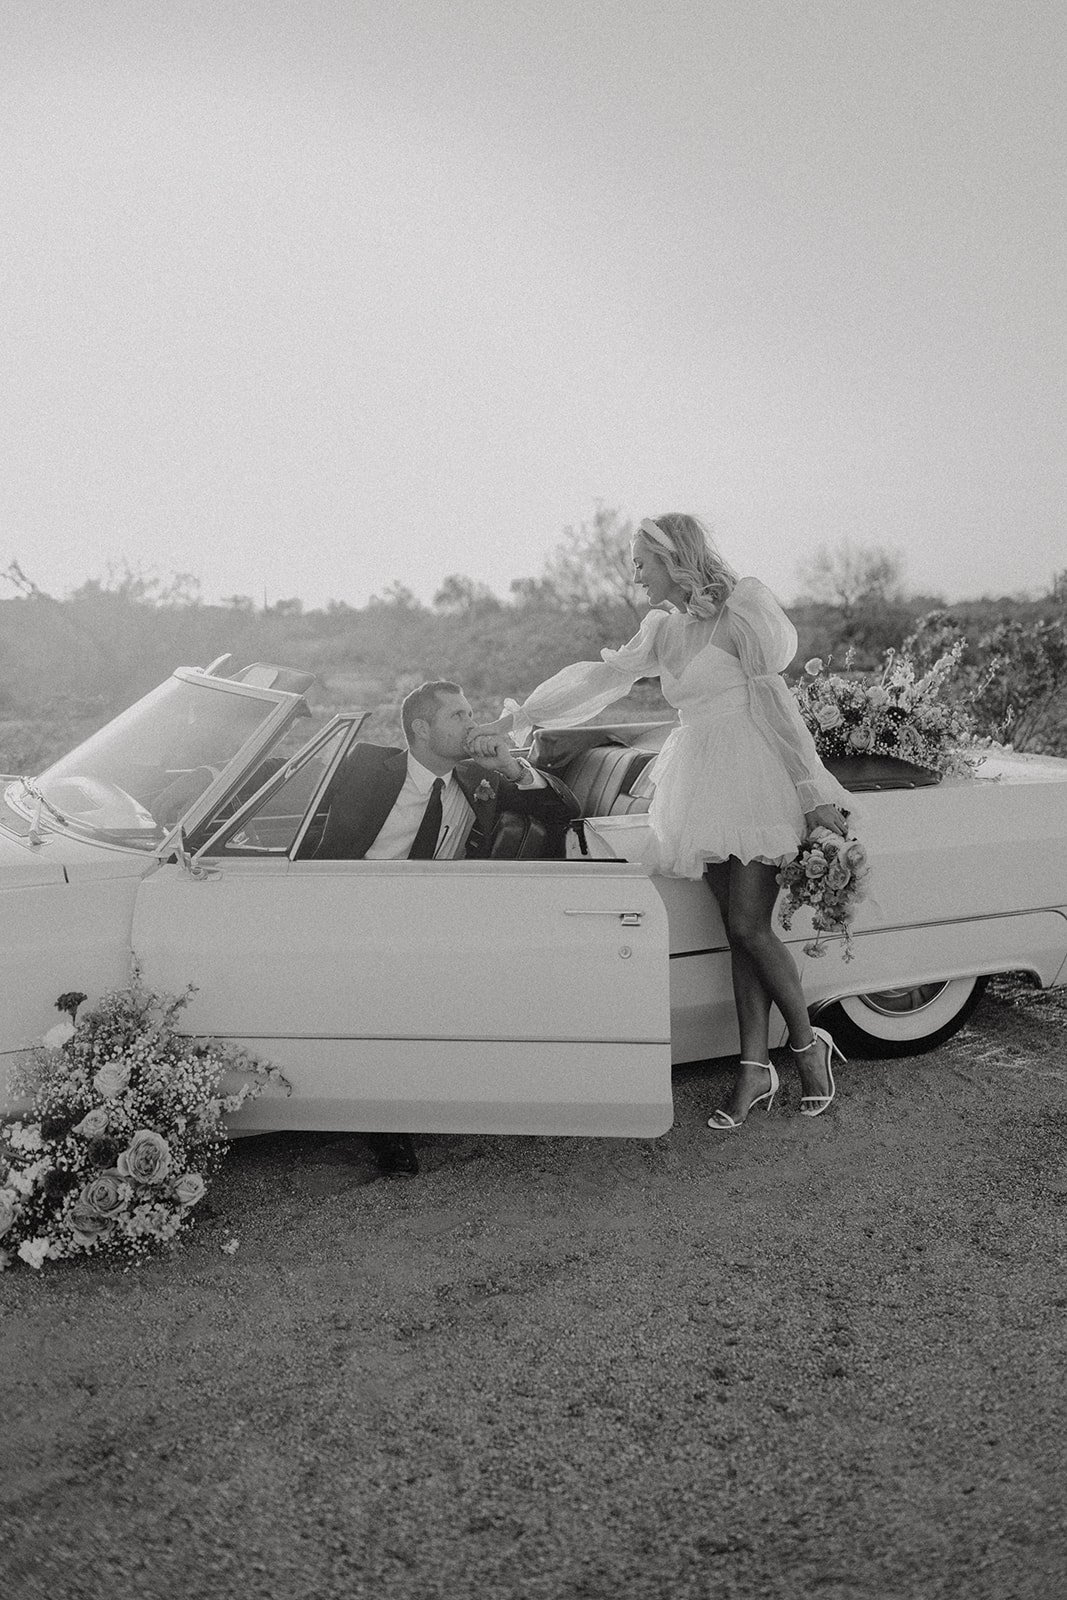 Bride reaching for groom inside vintage white convertible